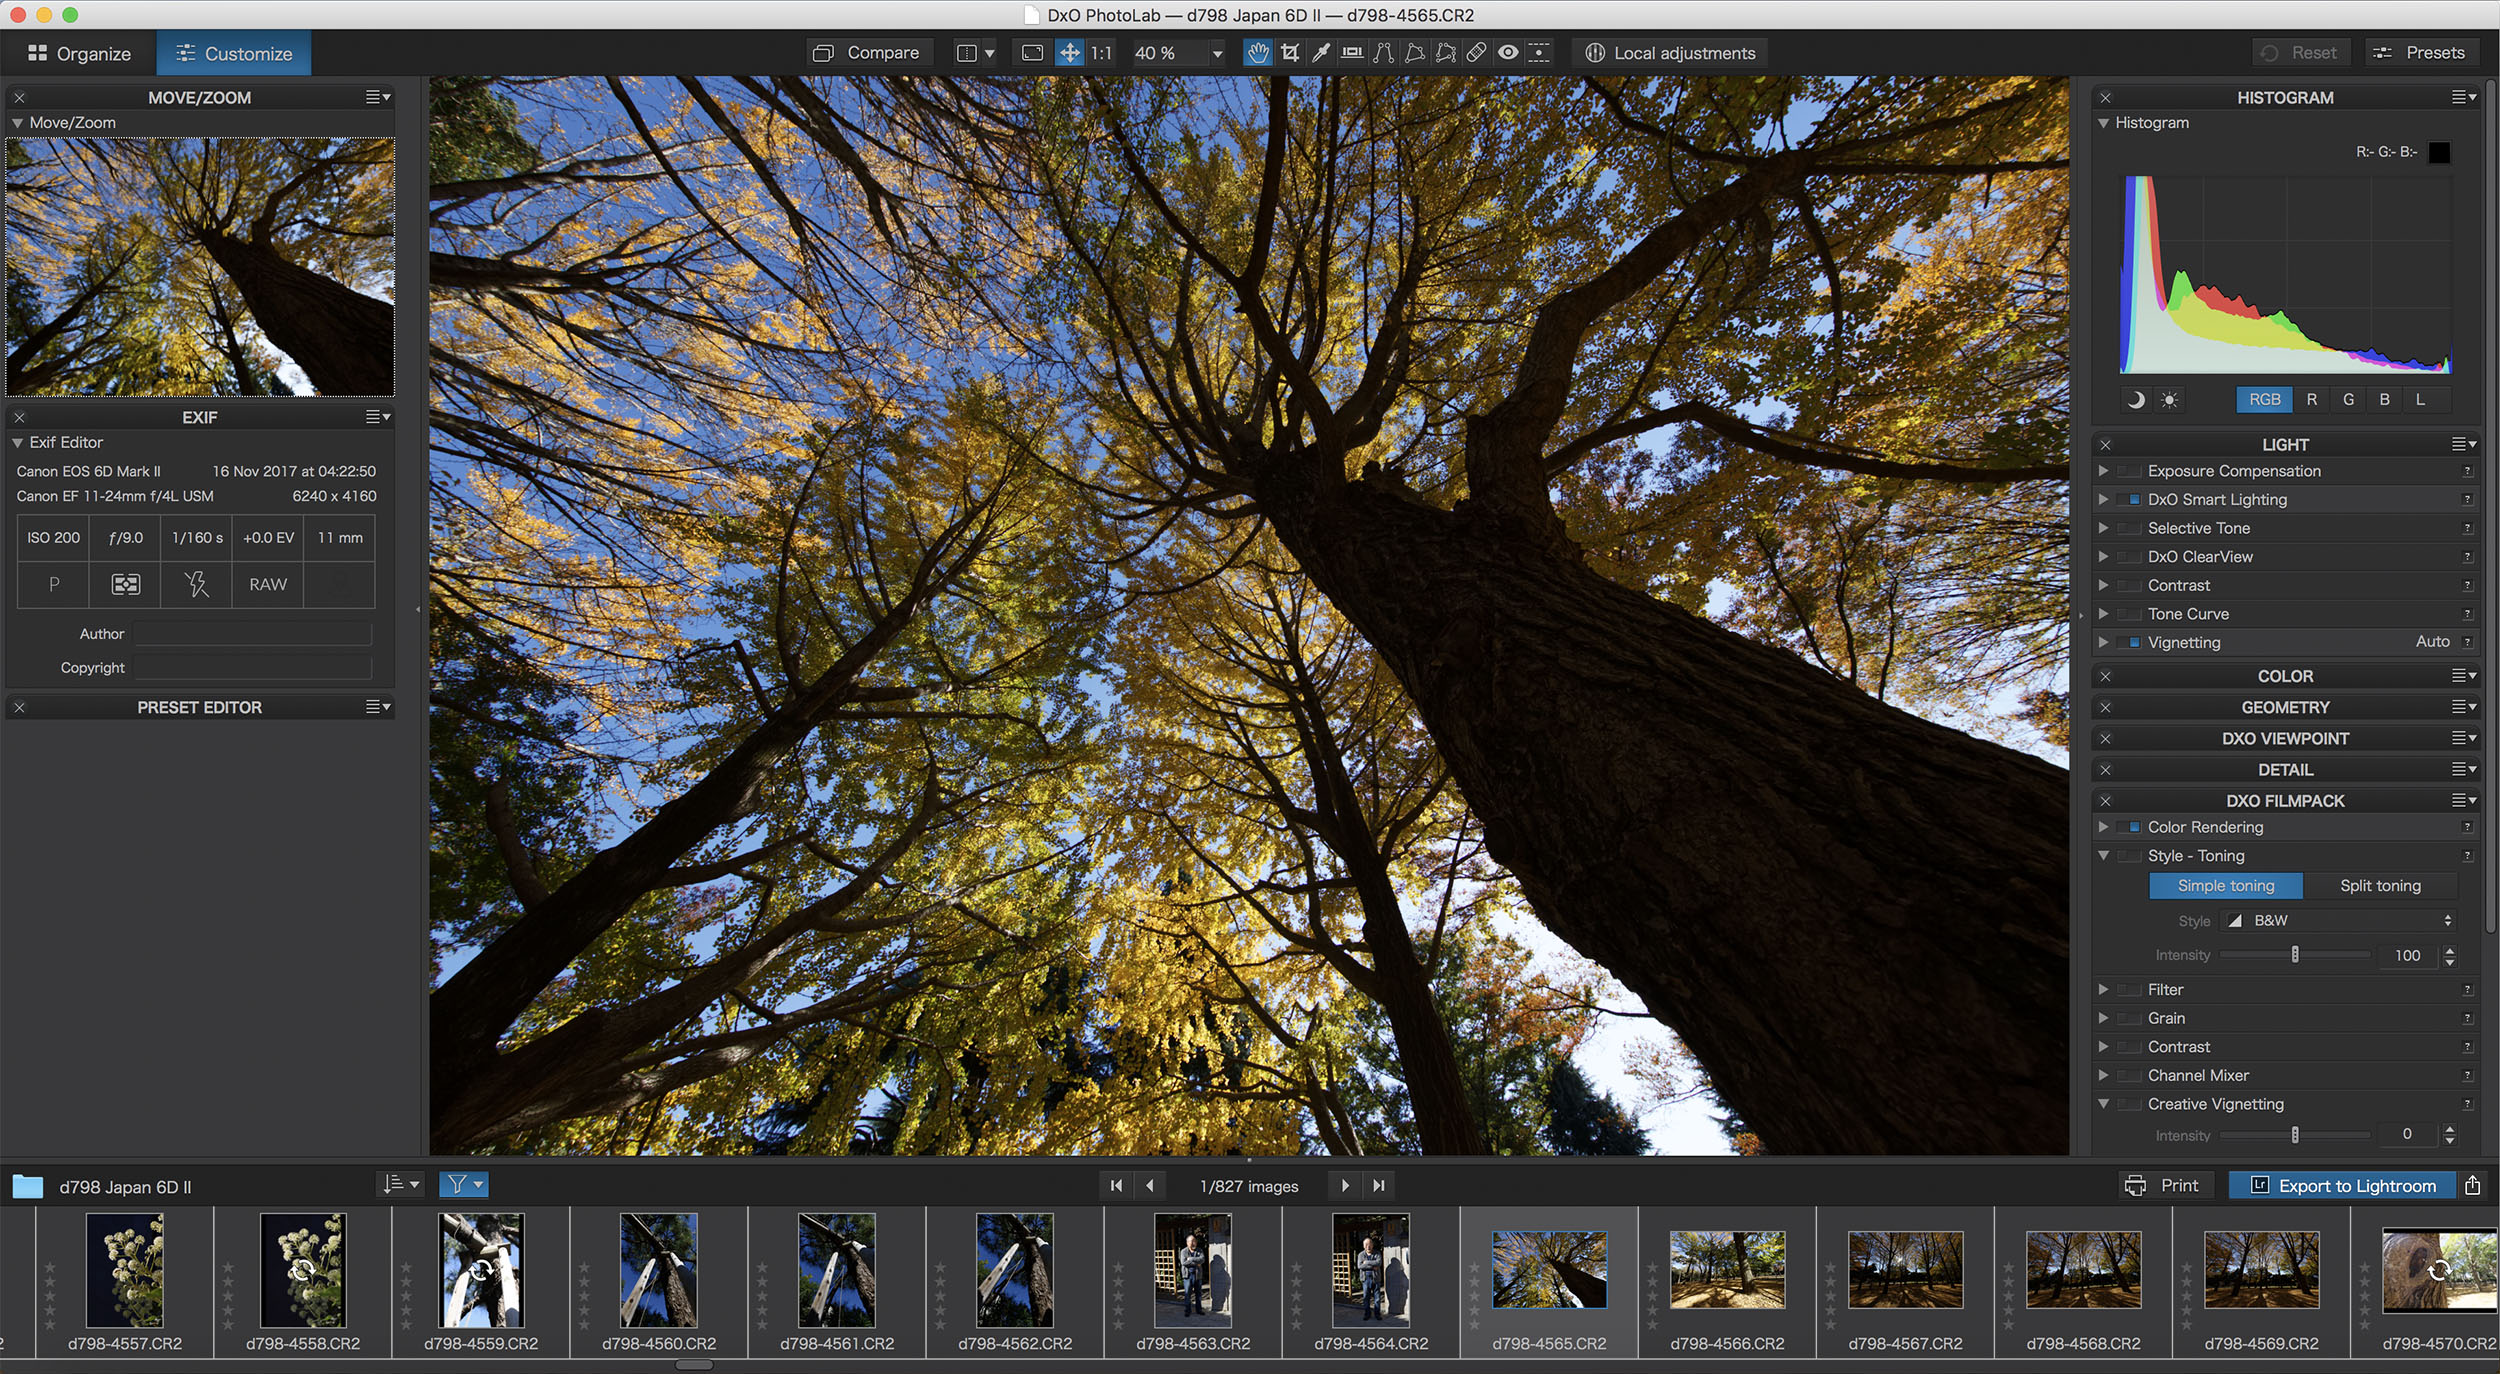 Adobe Photoshop Lightroom Classic CC 2023 v12.5.0.1 download the new version for ios